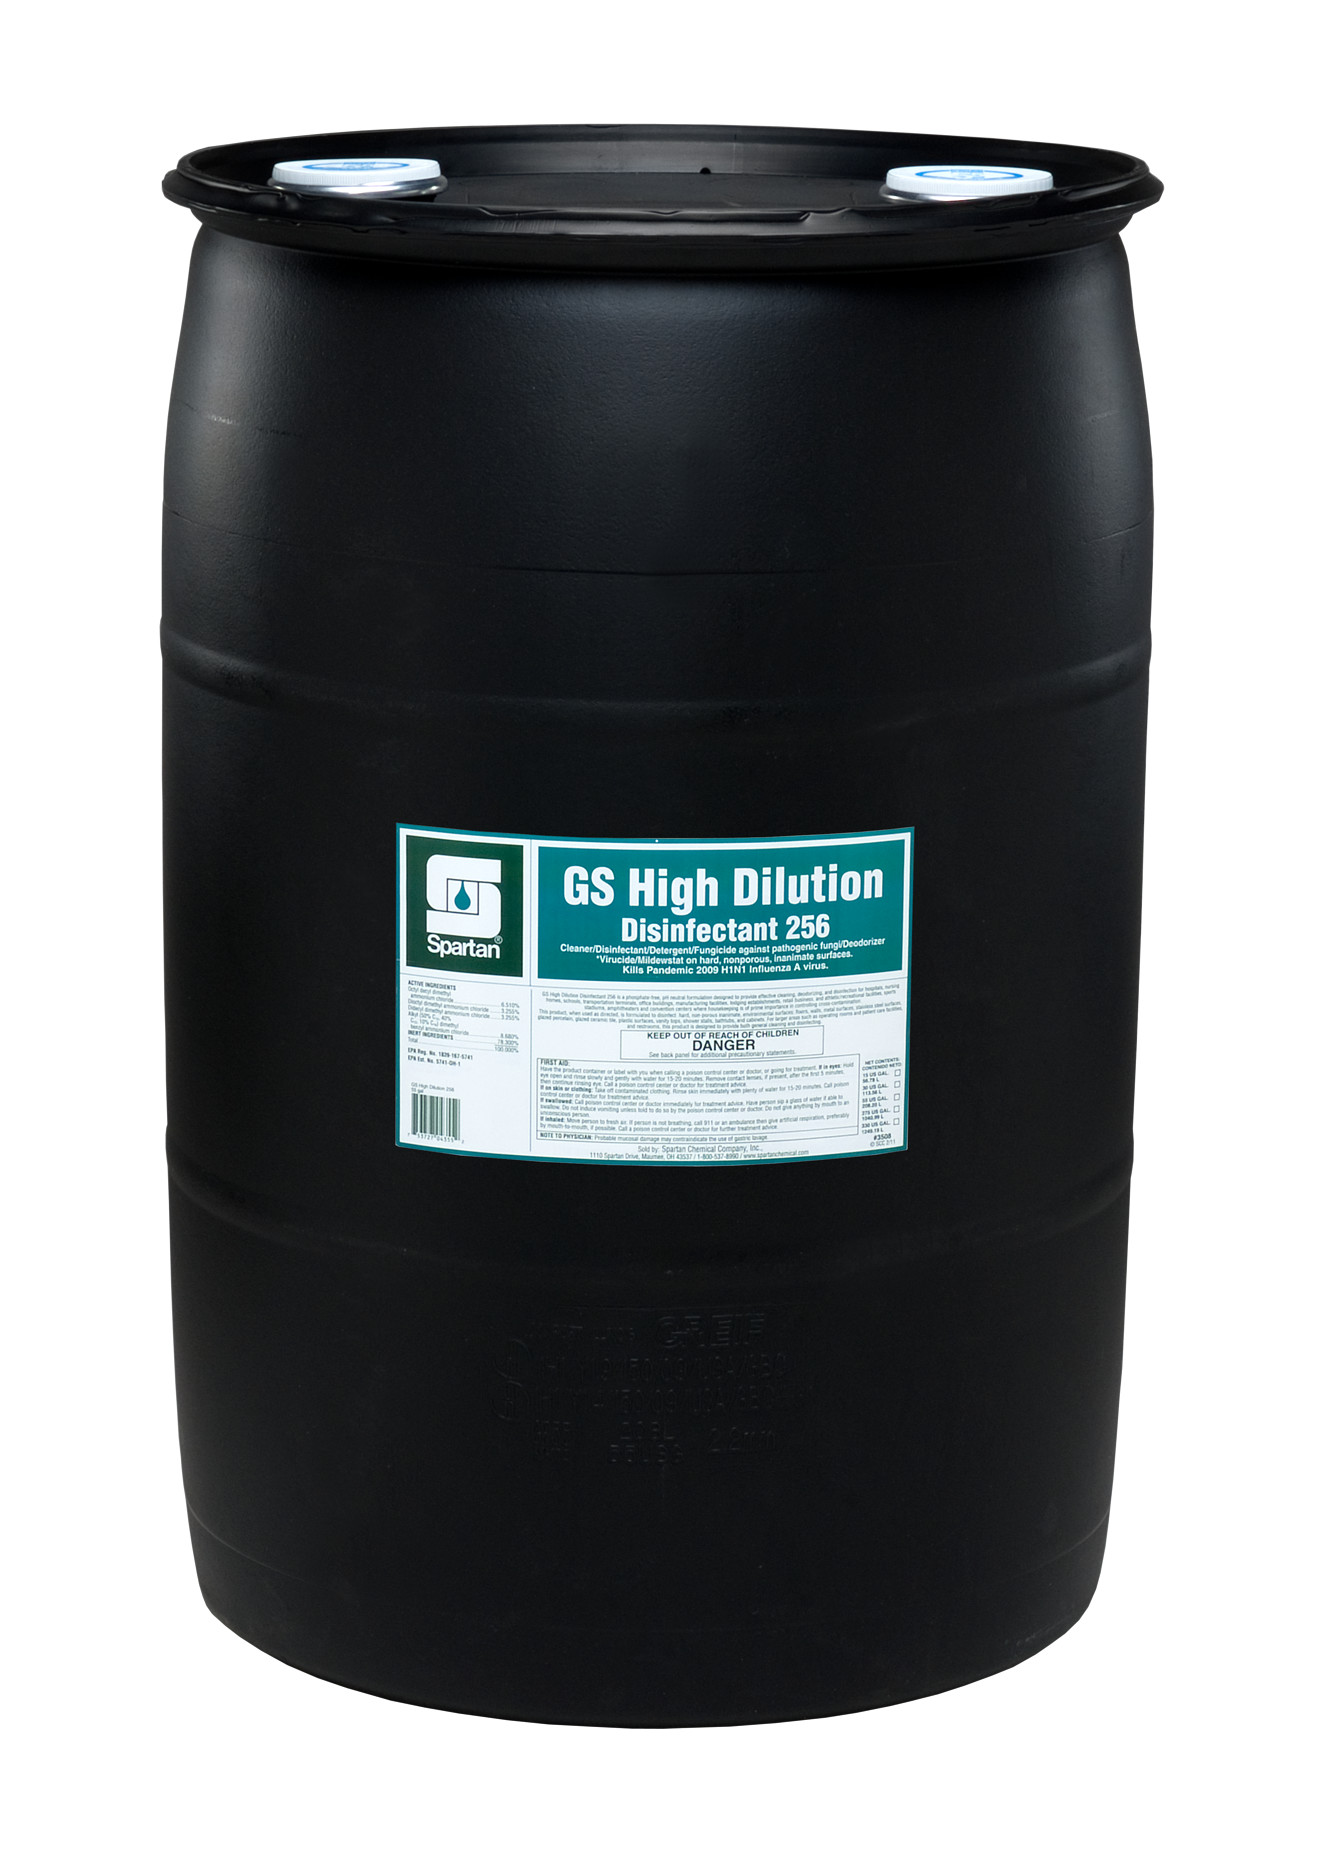 Spartan Chemical Company GS High Dilution Disinfectant 256, 55 GAL DRUM